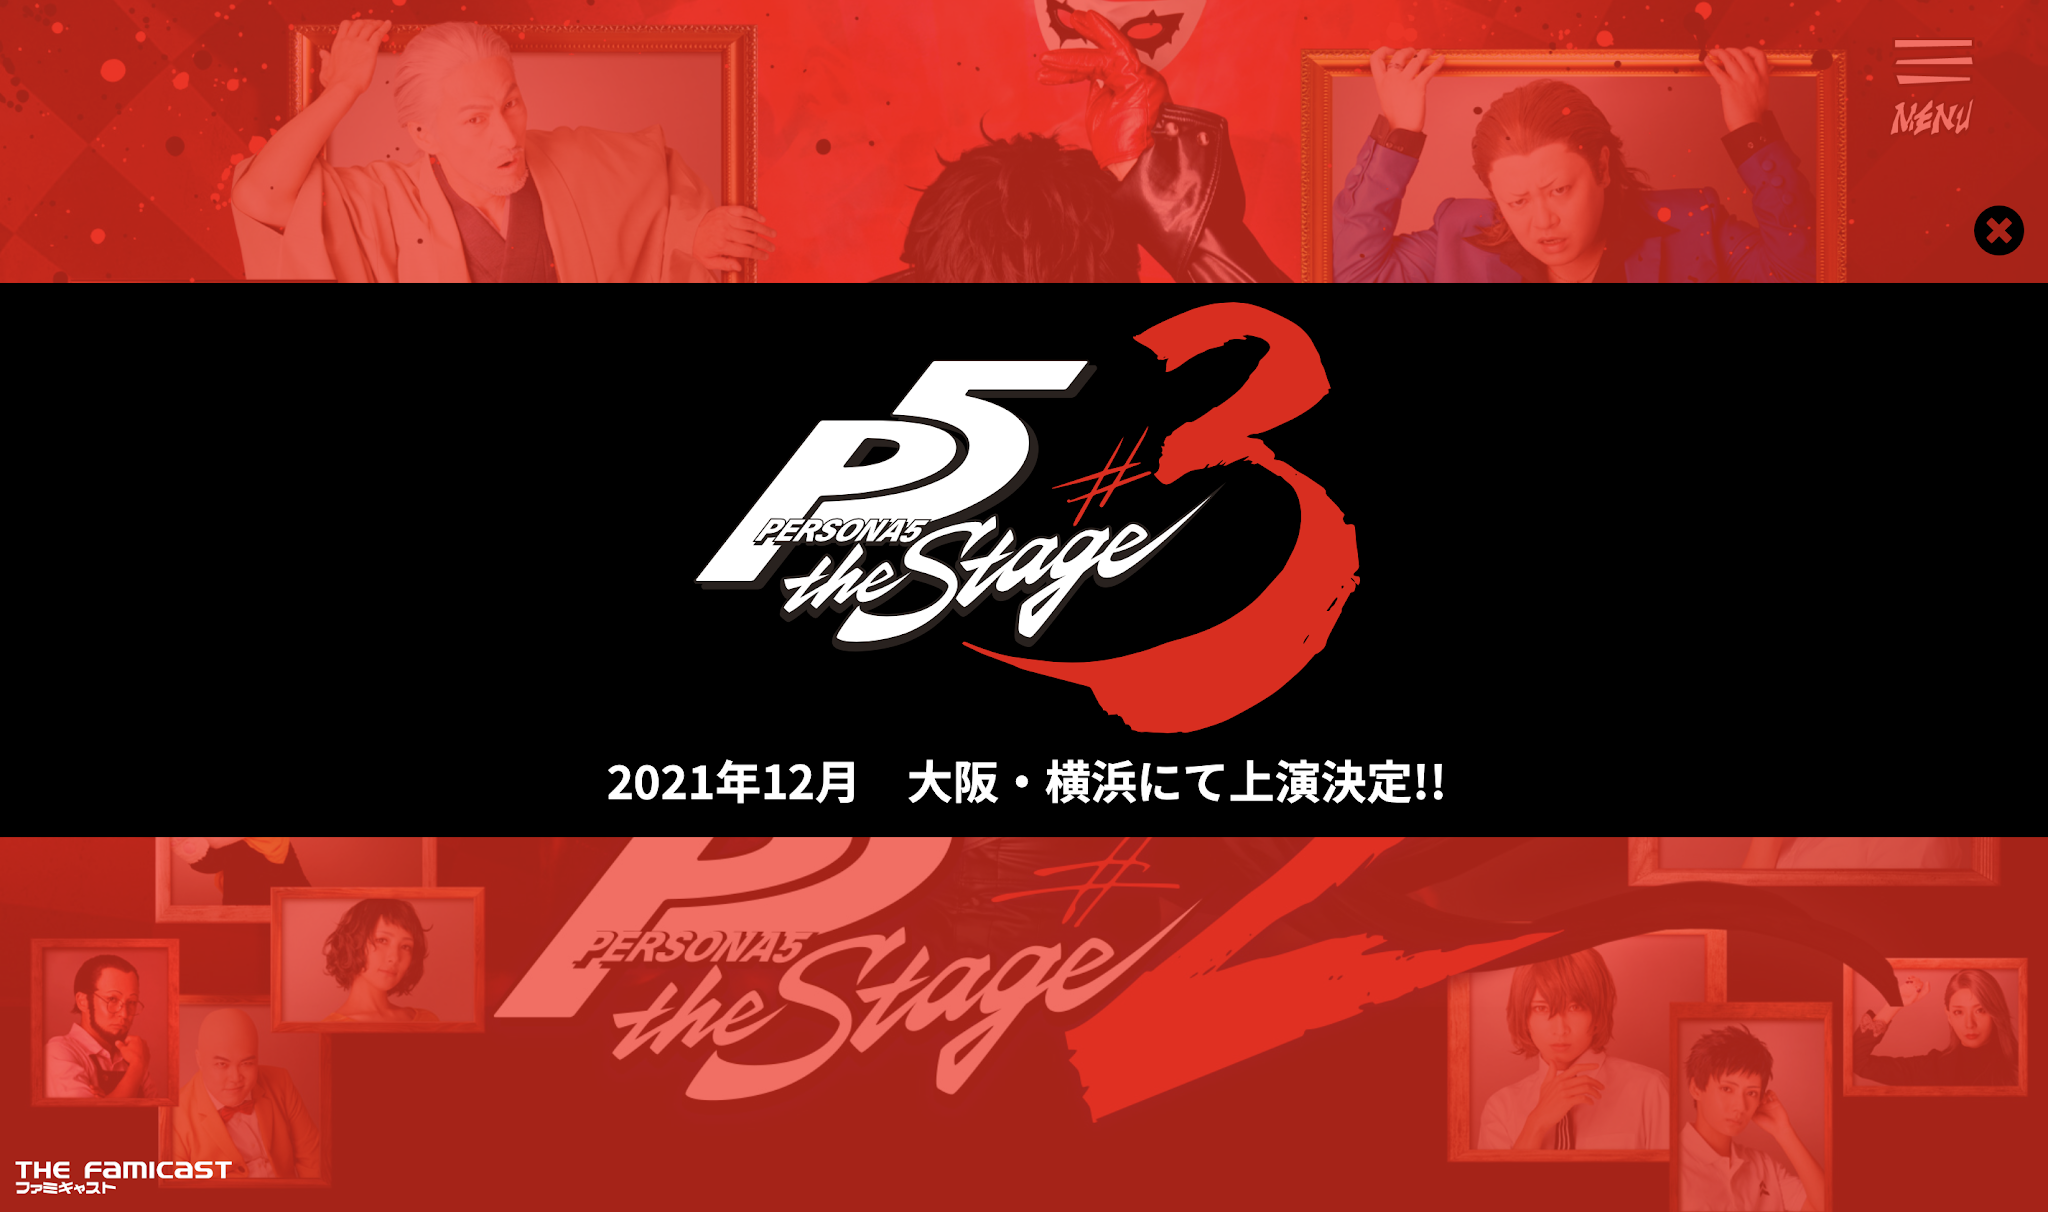 Persona 5 Stage Show Coming to Japan this December